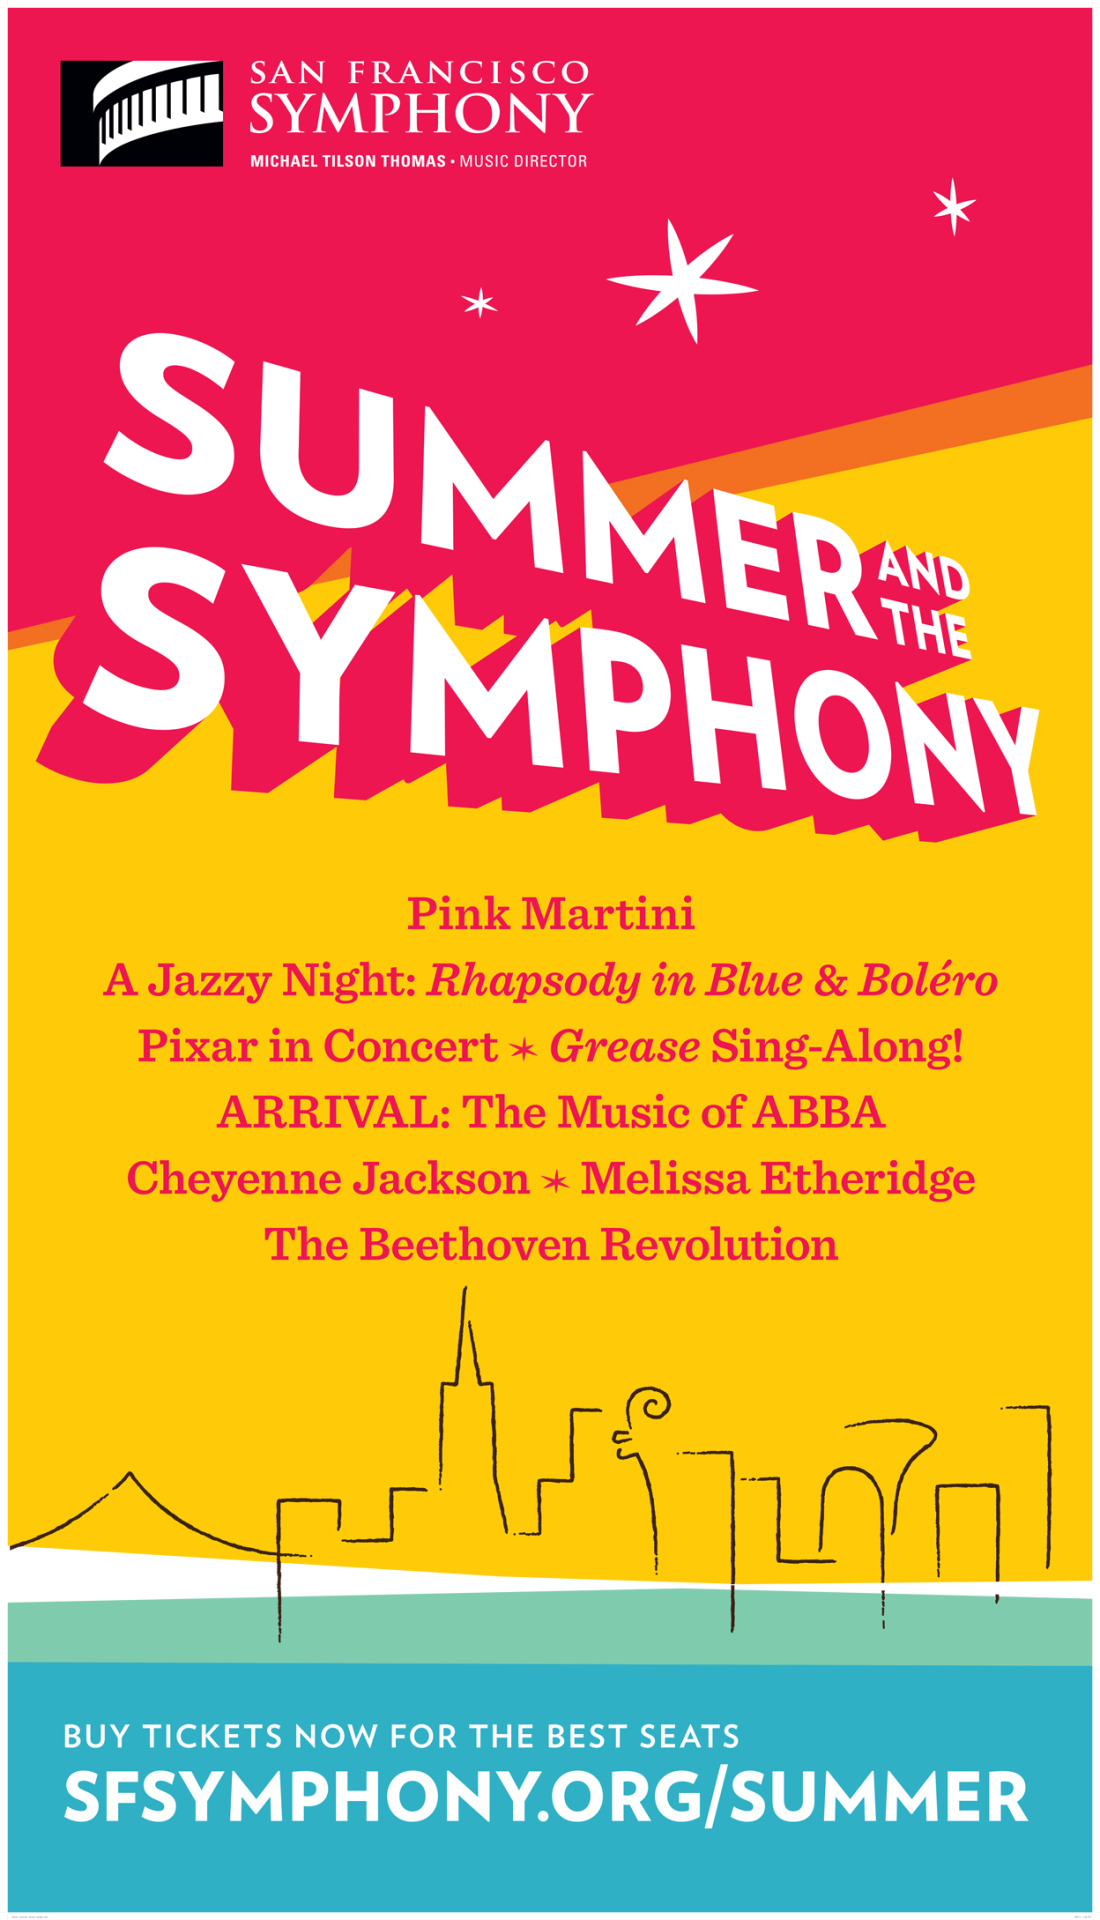 #SymphonySummer starts July 2 at Davies Symphony Hall! We are so excited about this summer’s concert line-up with new Director of Summer Concerts Edwin Outwater, and hope you’ll join us at least once with your friends and family:...